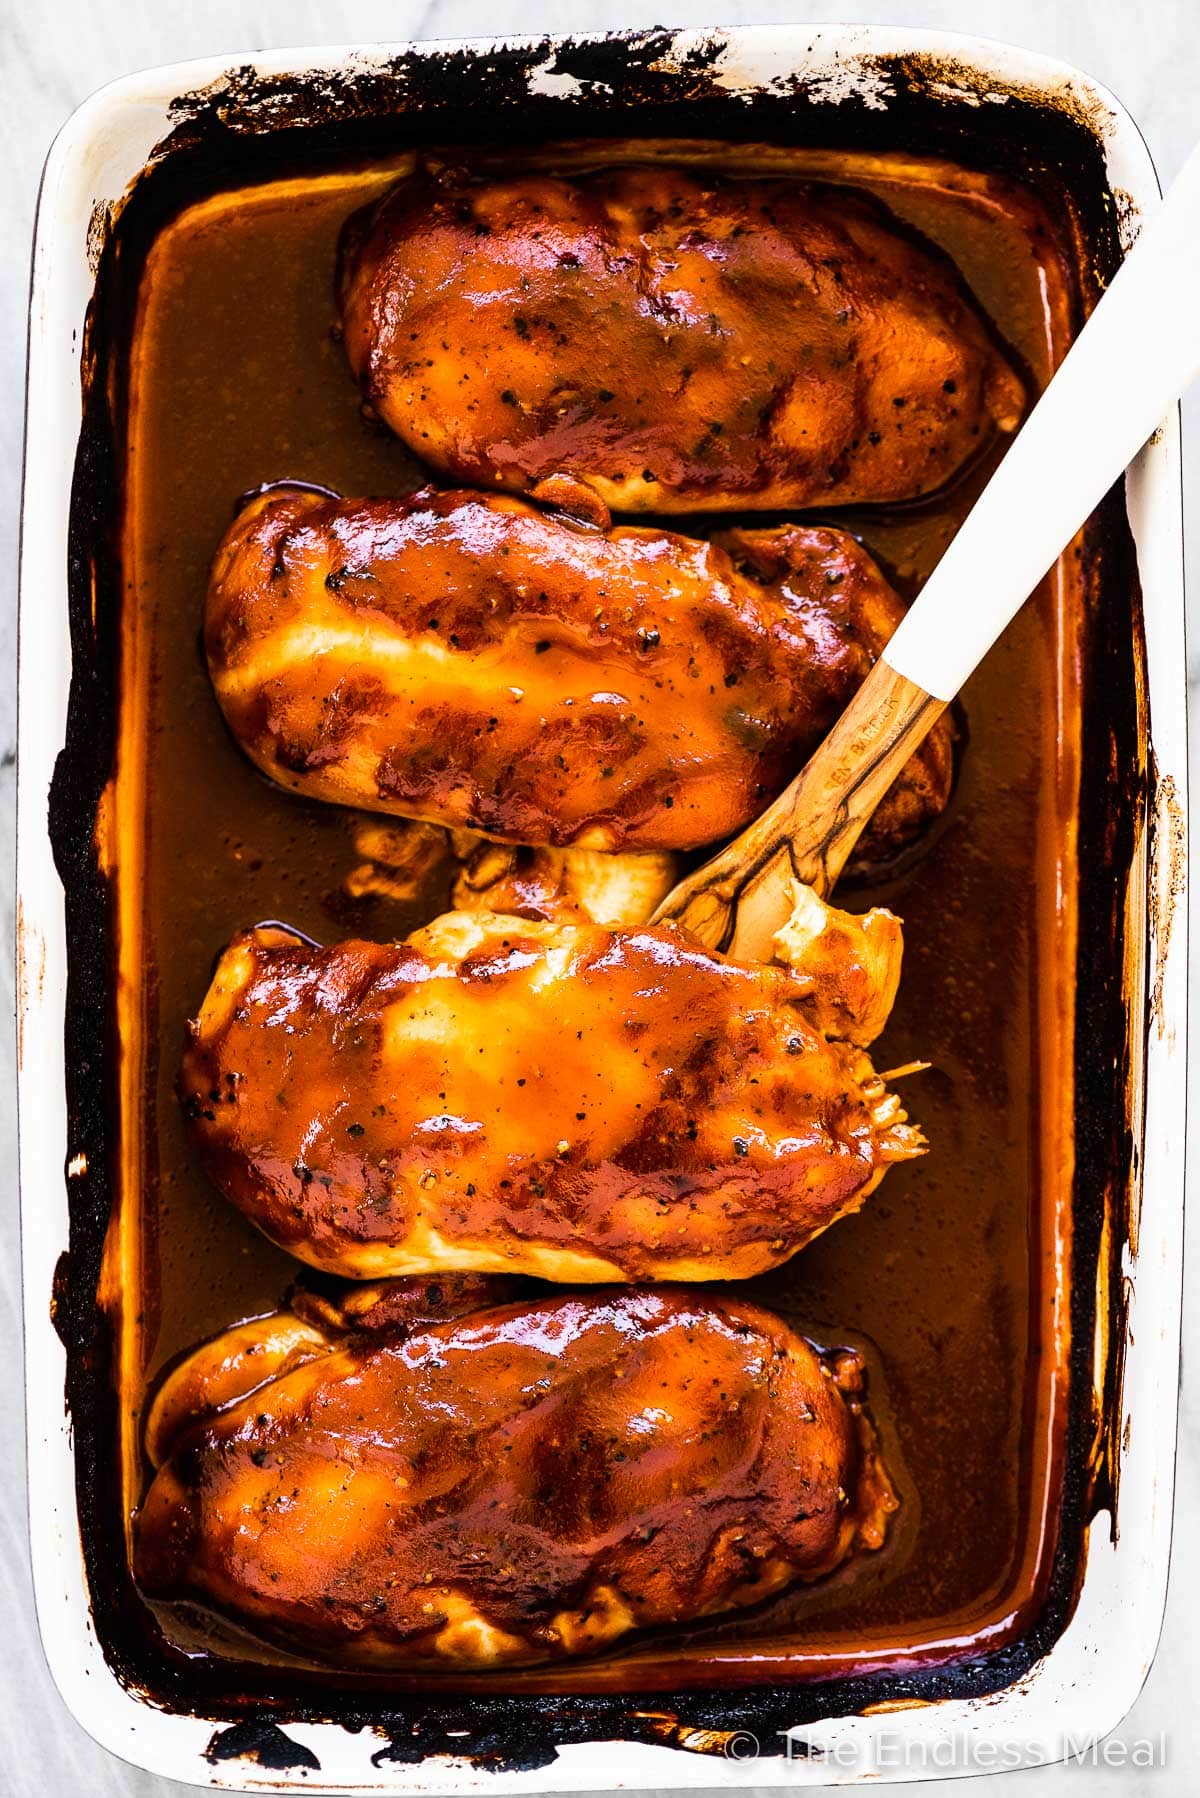 Four cooked chicken breasts covered with bbq sauce in a baking dish.